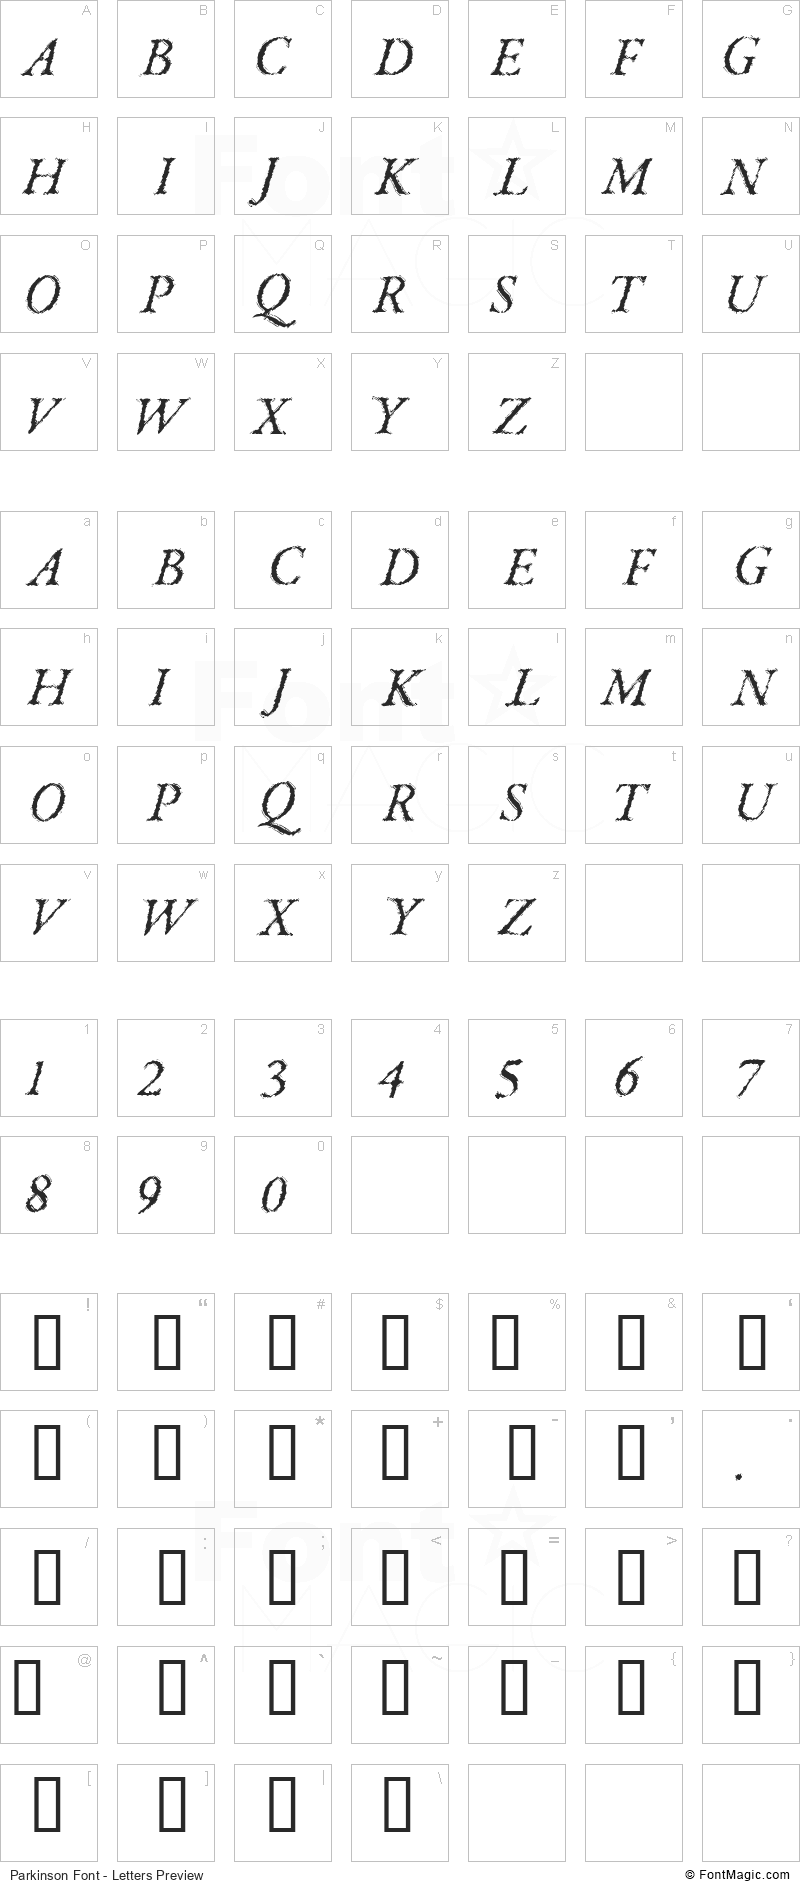 Parkinson Font - All Latters Preview Chart